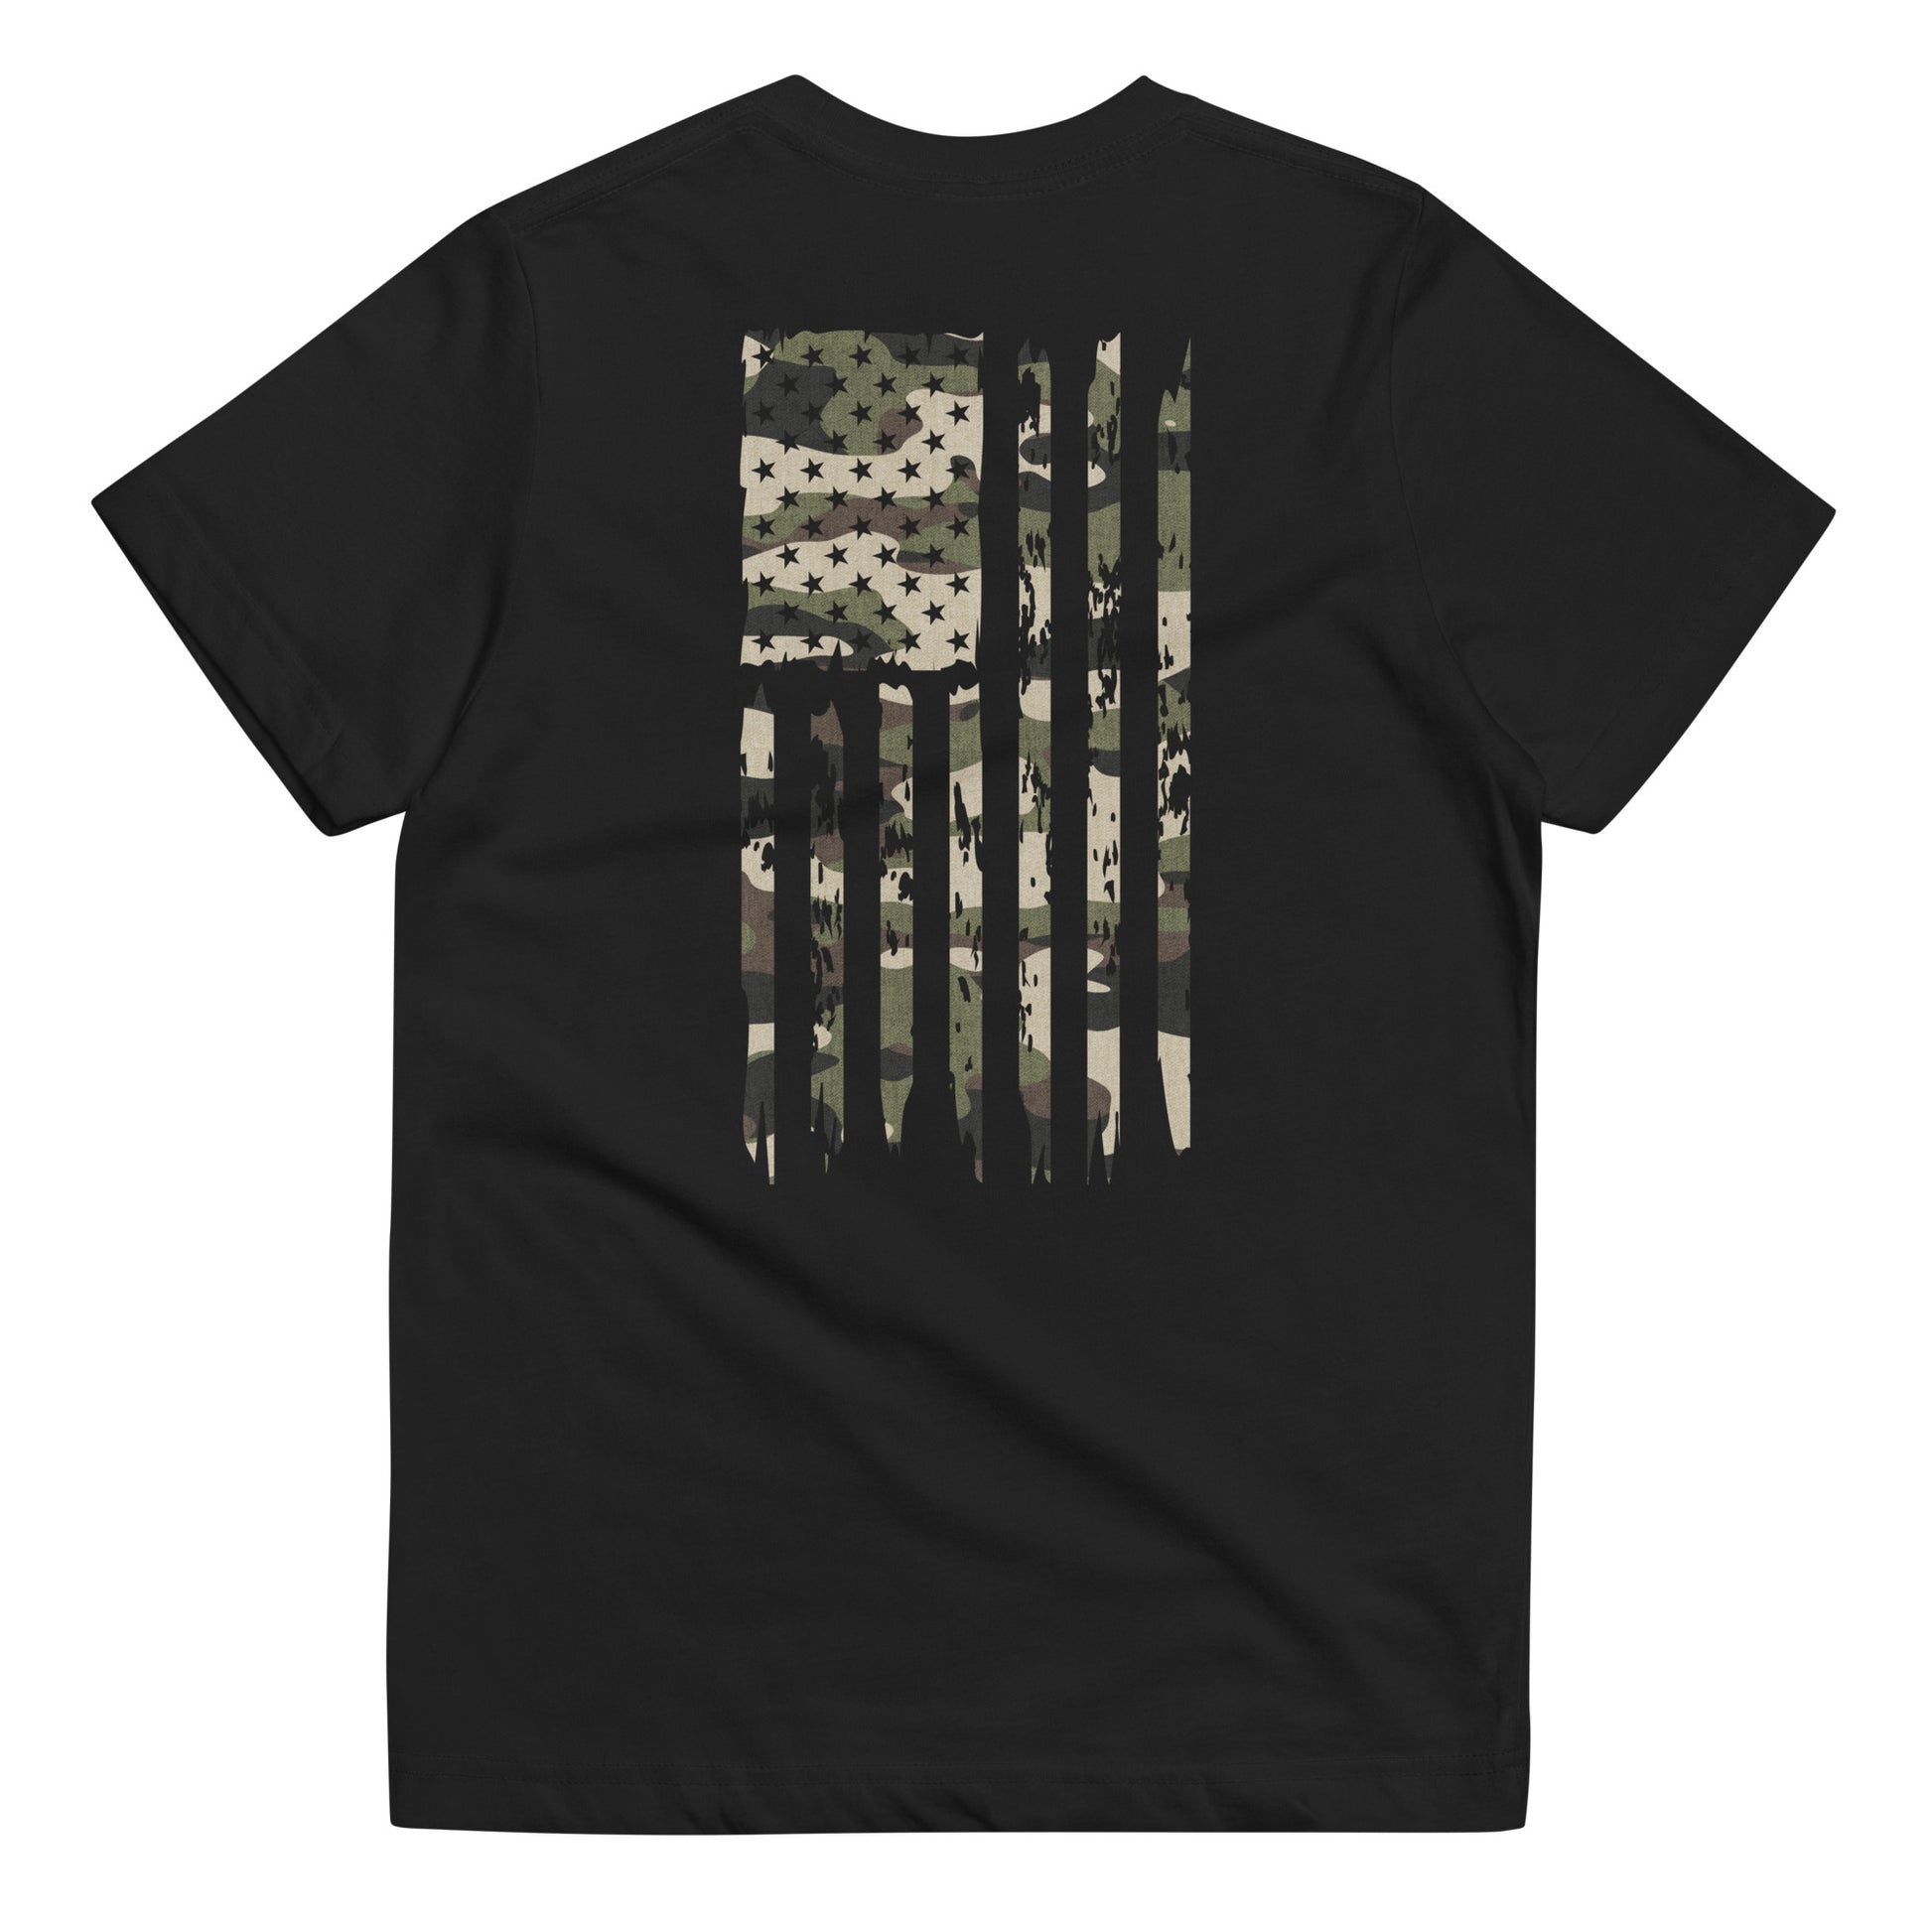 Black Patriotic Kids shirt. Let your young patriots show their love for America with our Youth Camo UNCIVIL Flag Tee featuring an American flag with an army overlay.